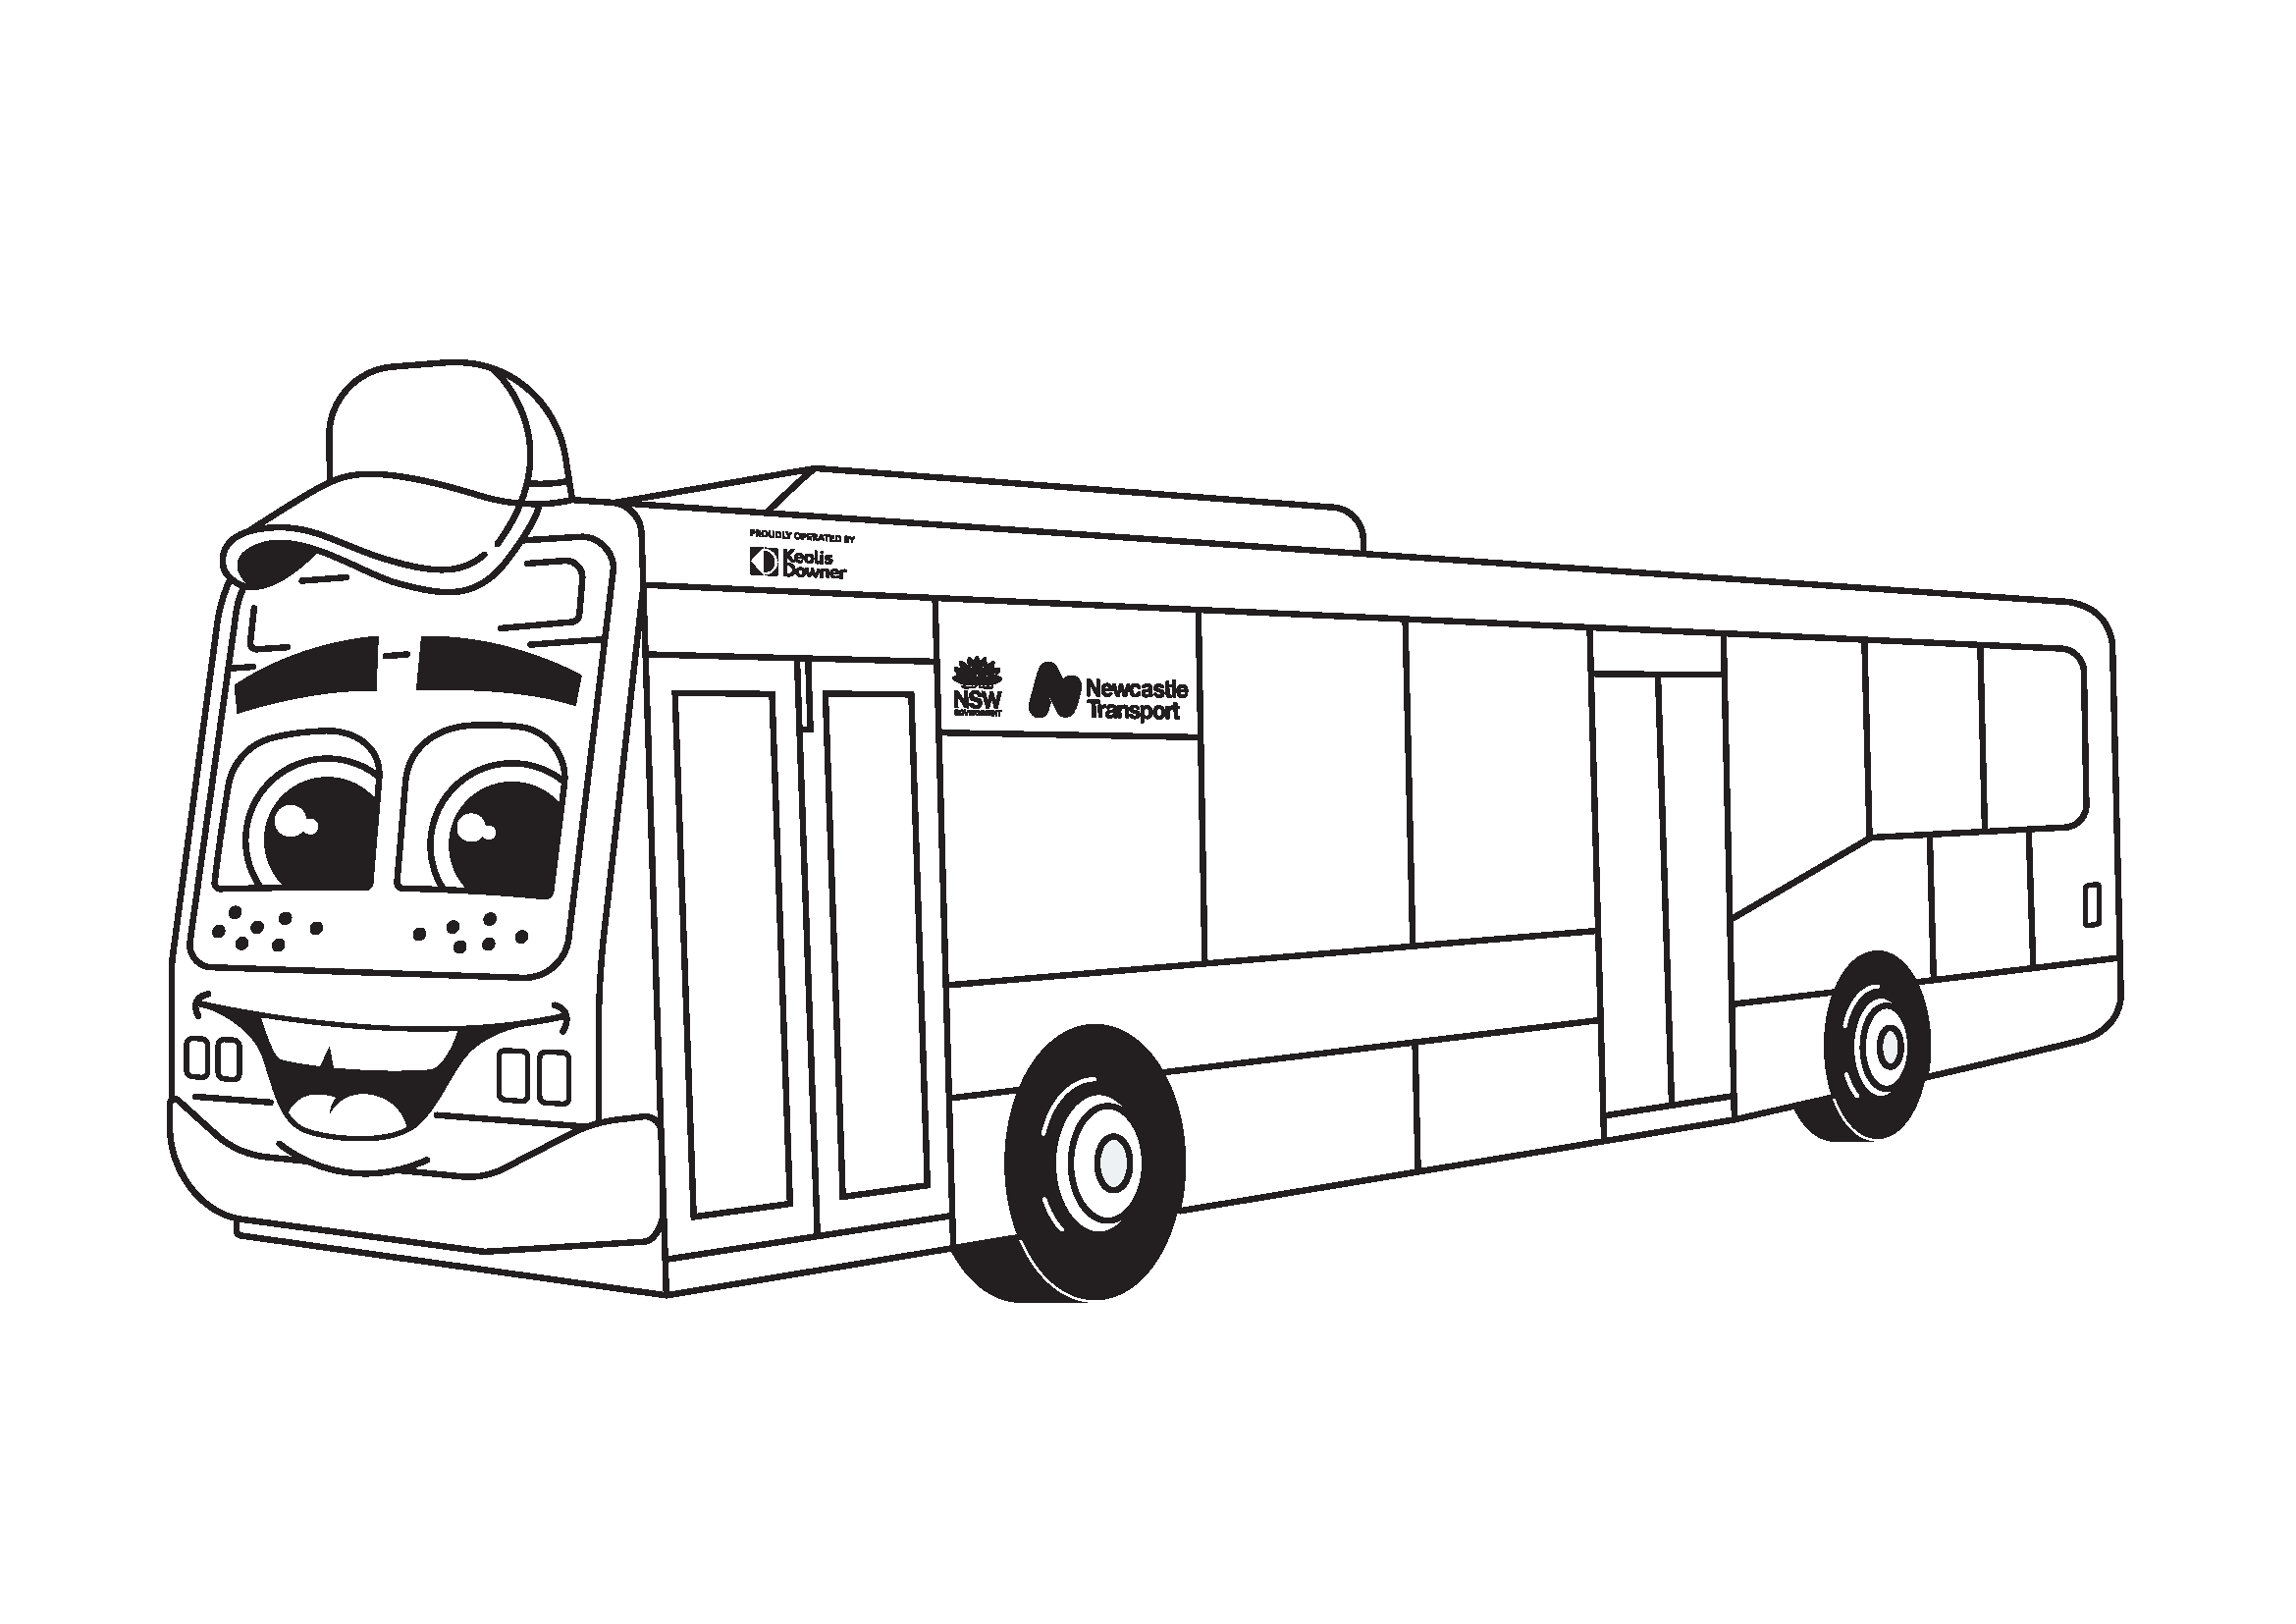 Billy the bus illustration